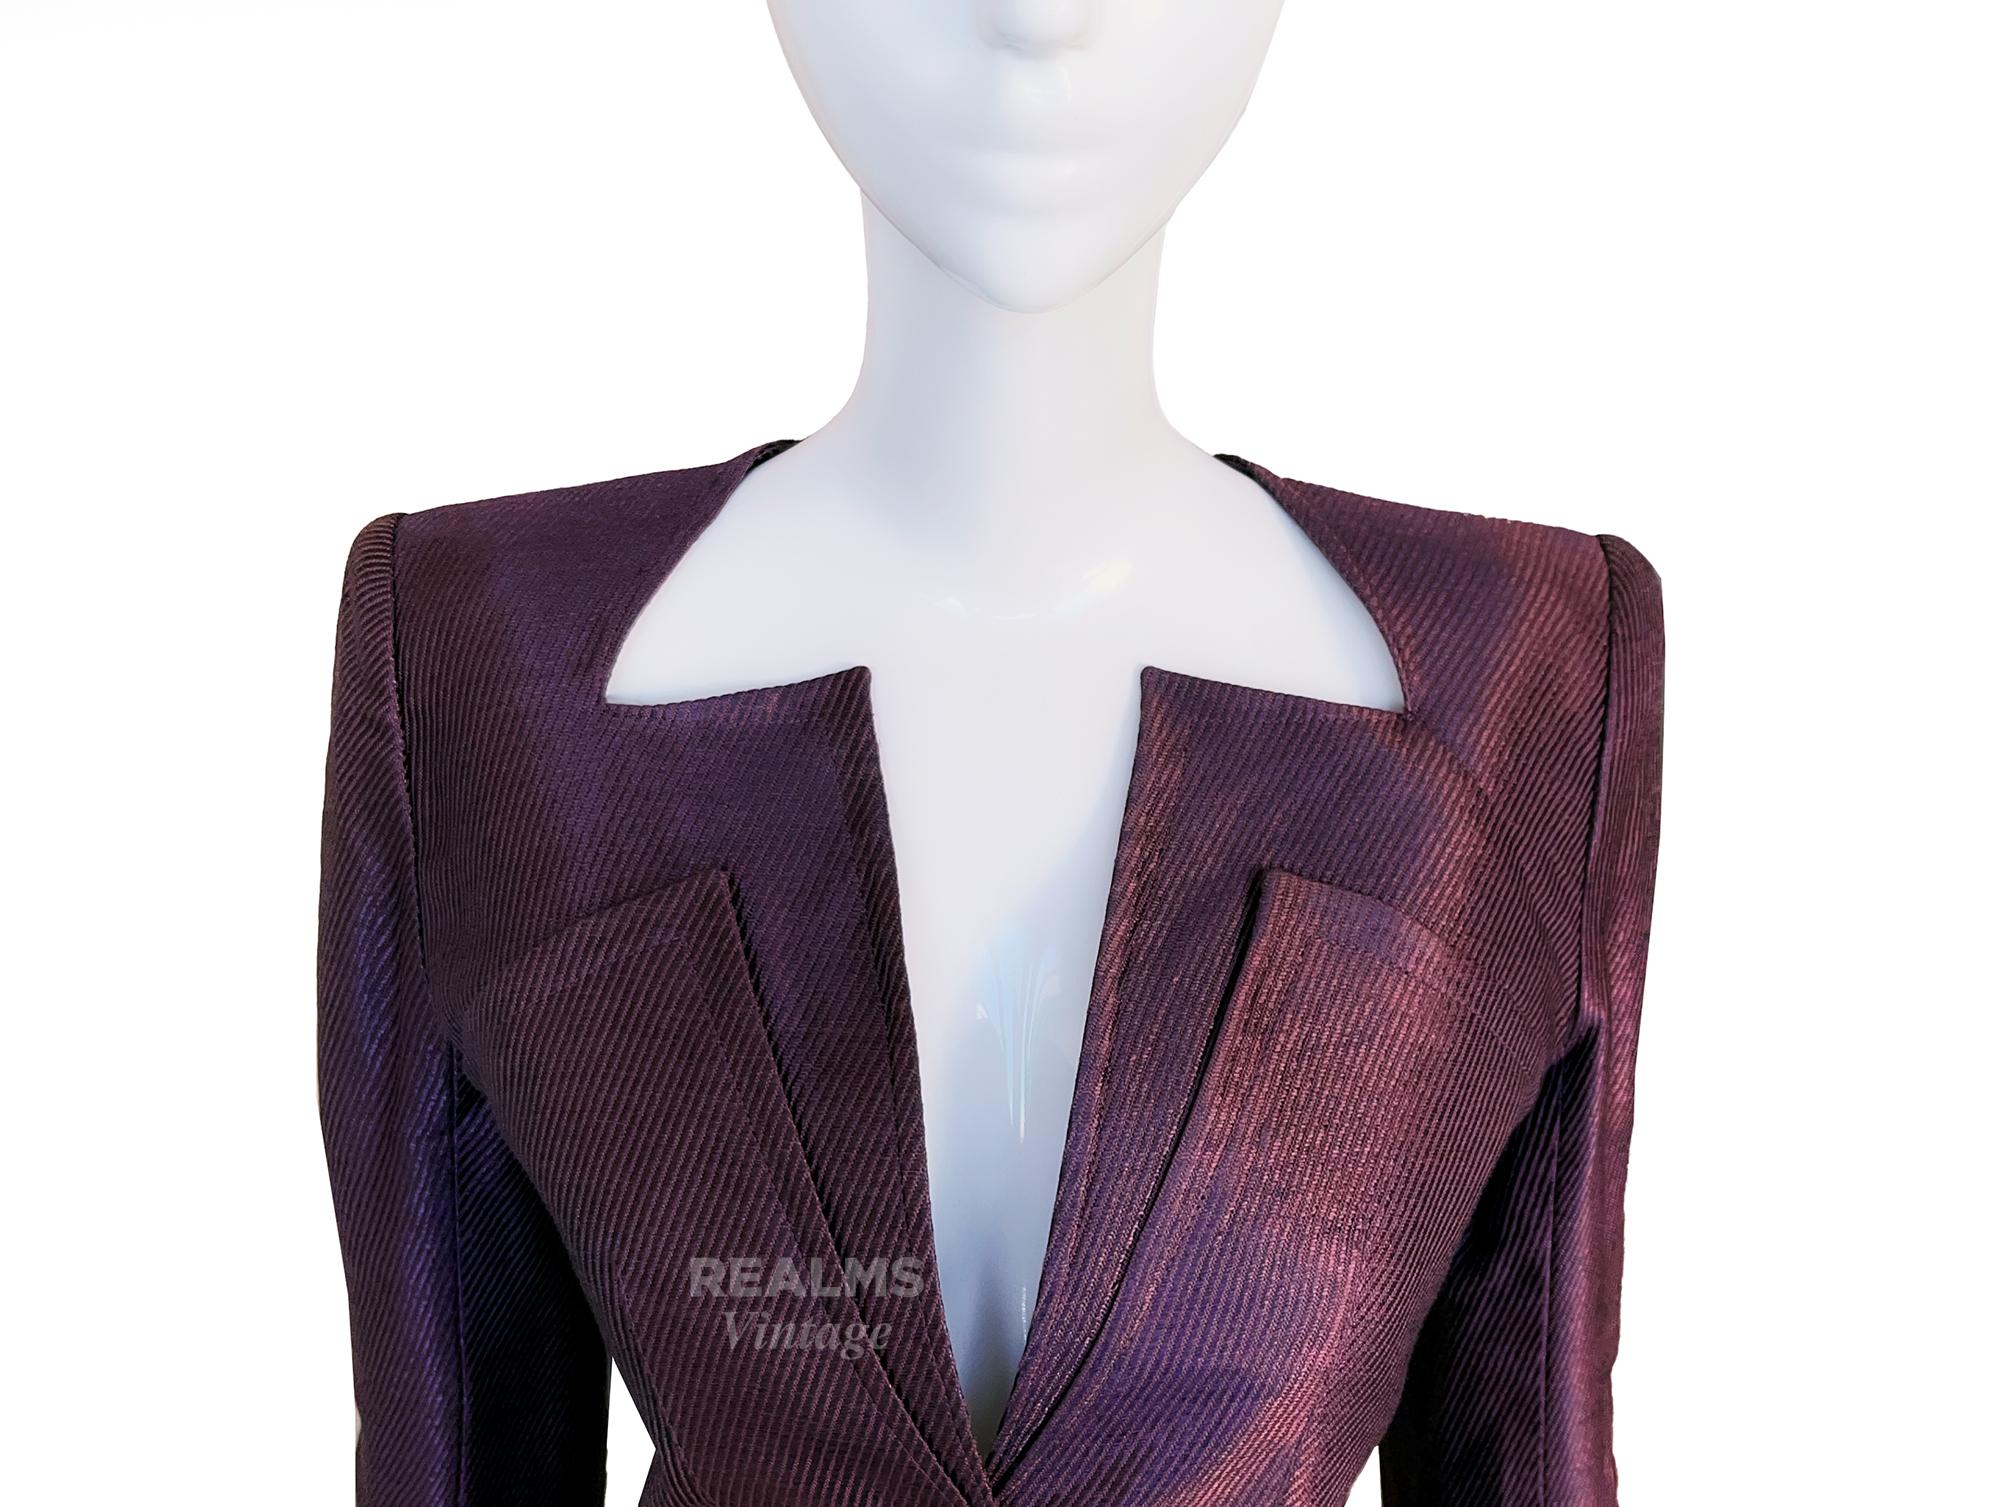 A gorgeous MUGLER creation. Dark purple blazer jacket with amazing avant-garde vibe. Zigzag Cutout Neckline, beautiful Mugleresque construction, feminine fitted shape and shiny silver press buttons at the front.
The colour shade is almost iridescent